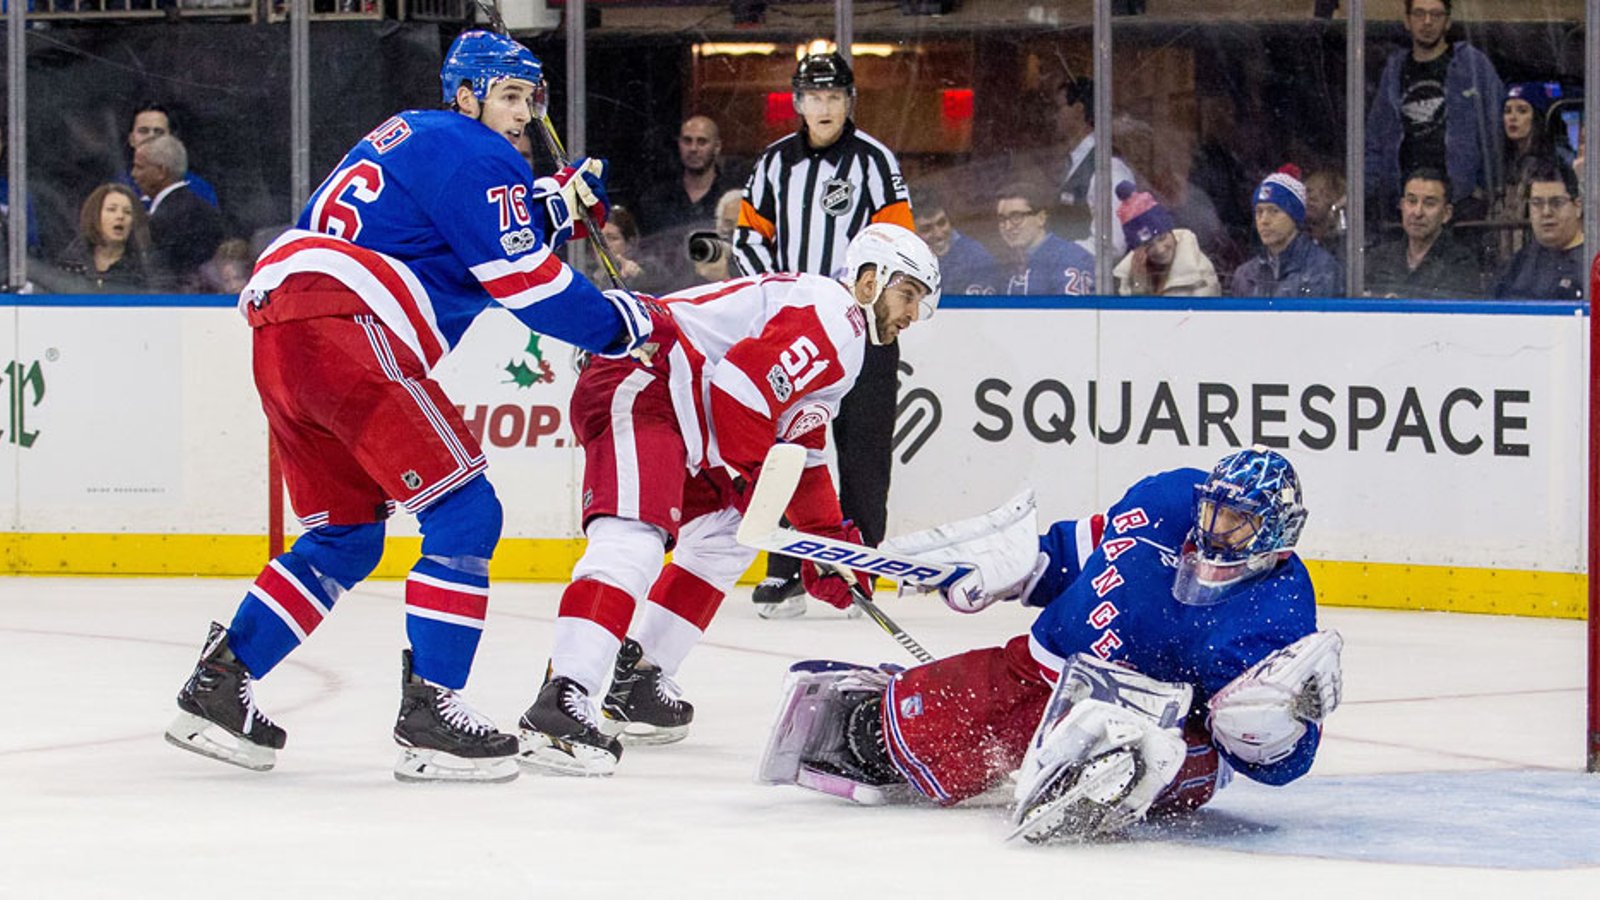 Rangers make changes ahead of Original Six matchup against Red Wings